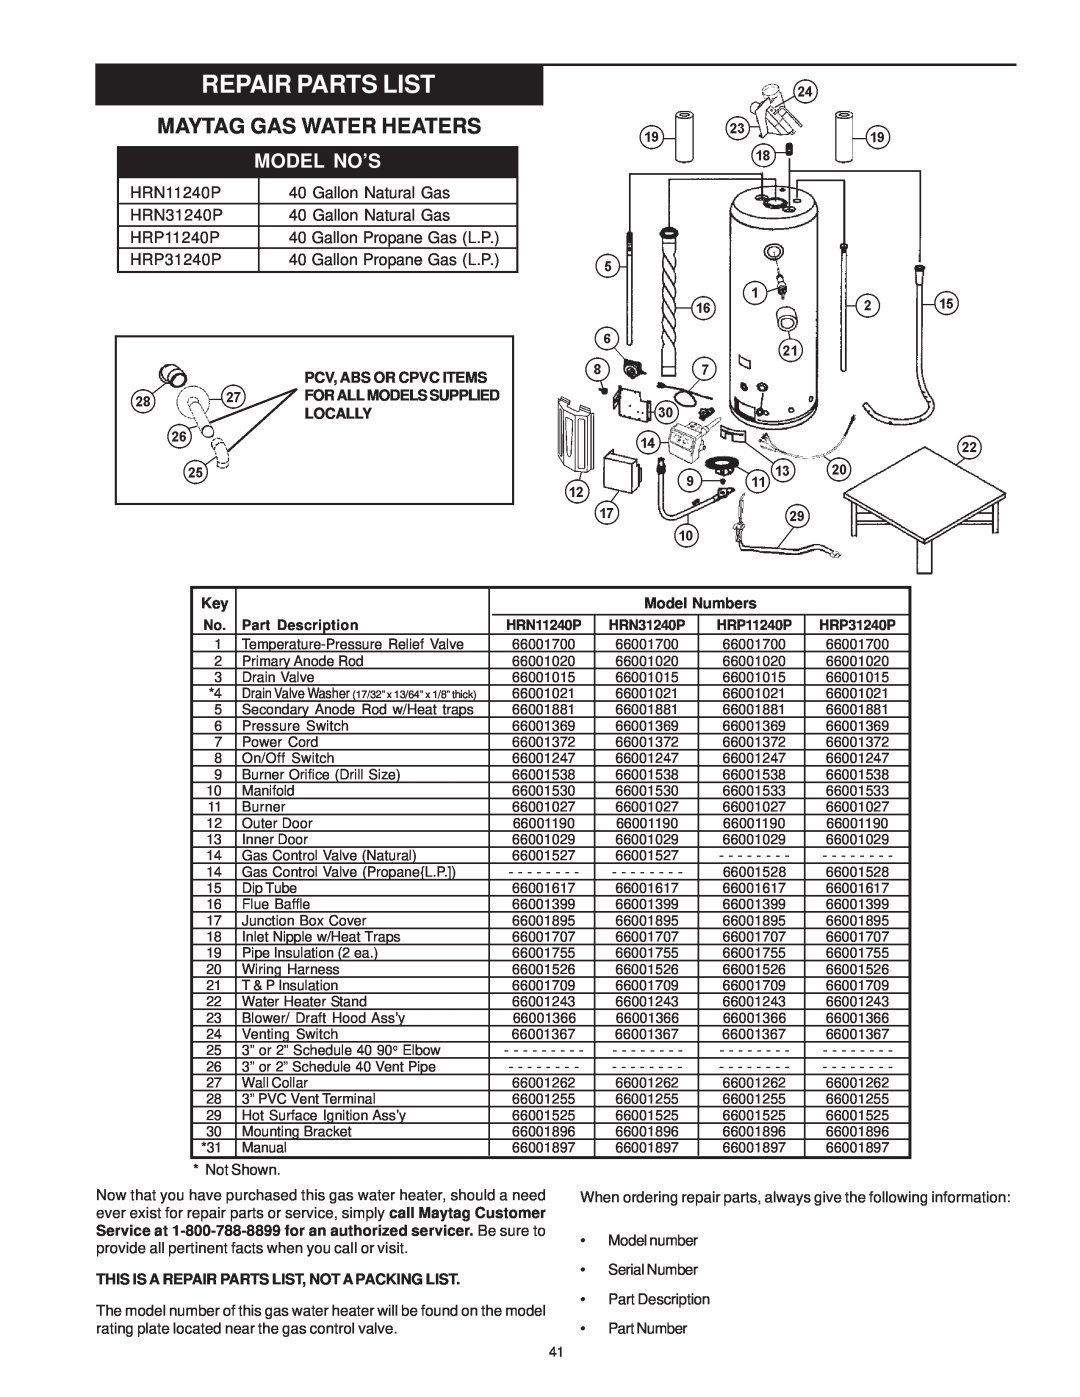 Maytag HRN31250P Repair Parts List, Model No’S, Pcv, Abs Or Cpvc Items For All Models Supplied, Locally, Model Numbers 